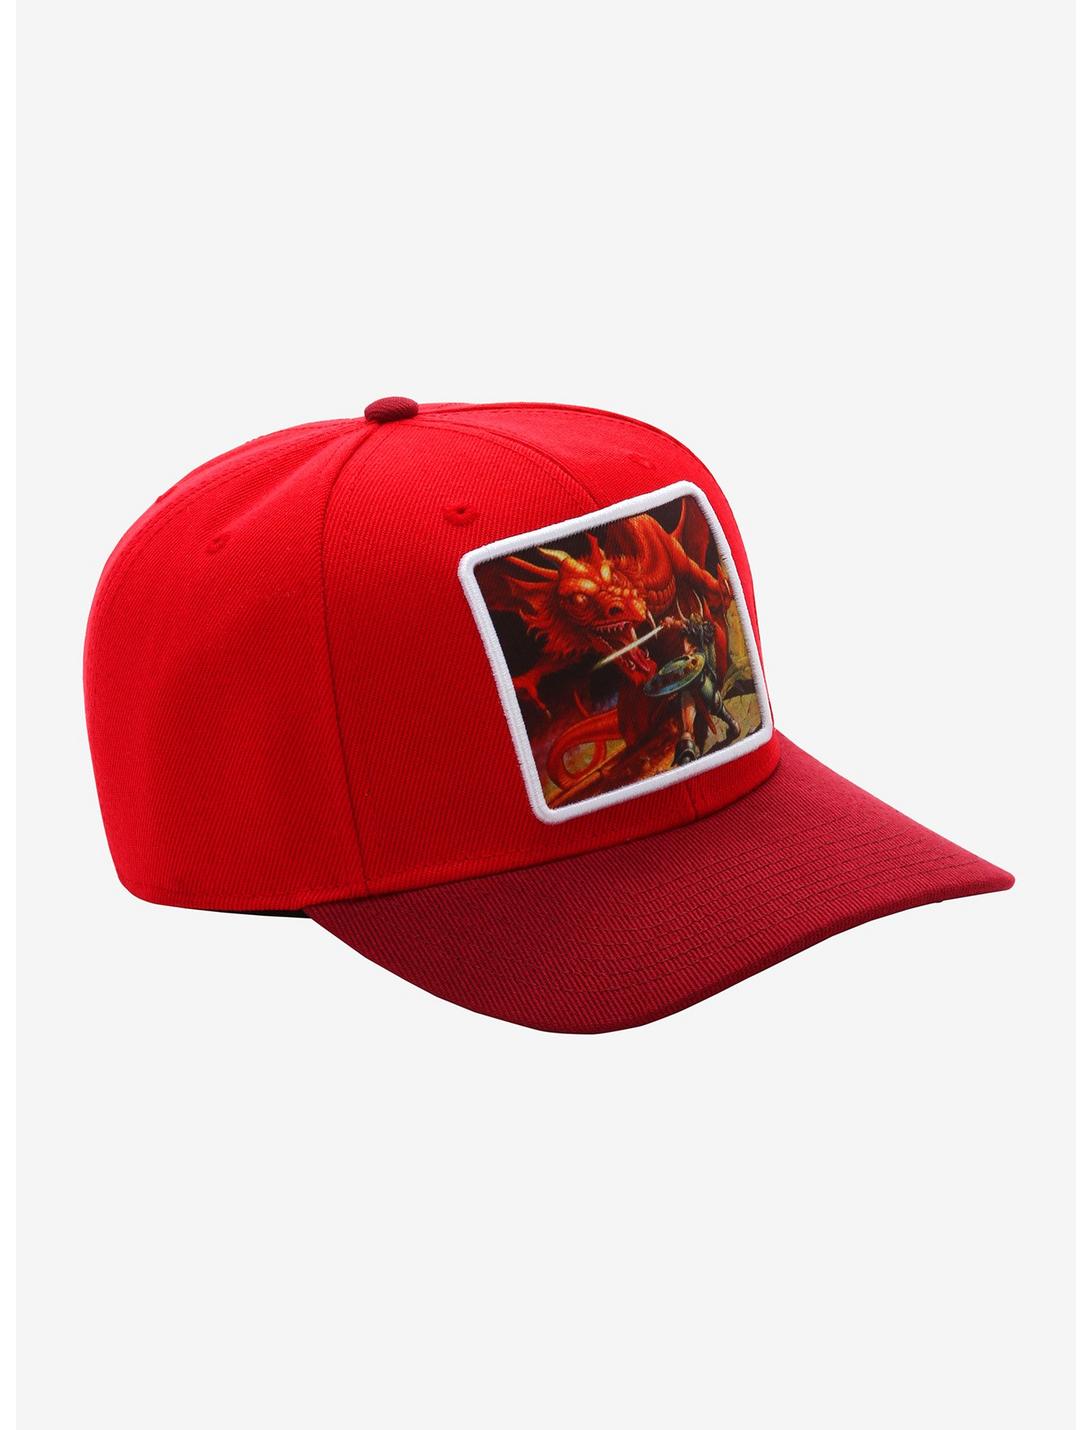 Dungeons & Dragons Patch Snapback Hat, , hi-res